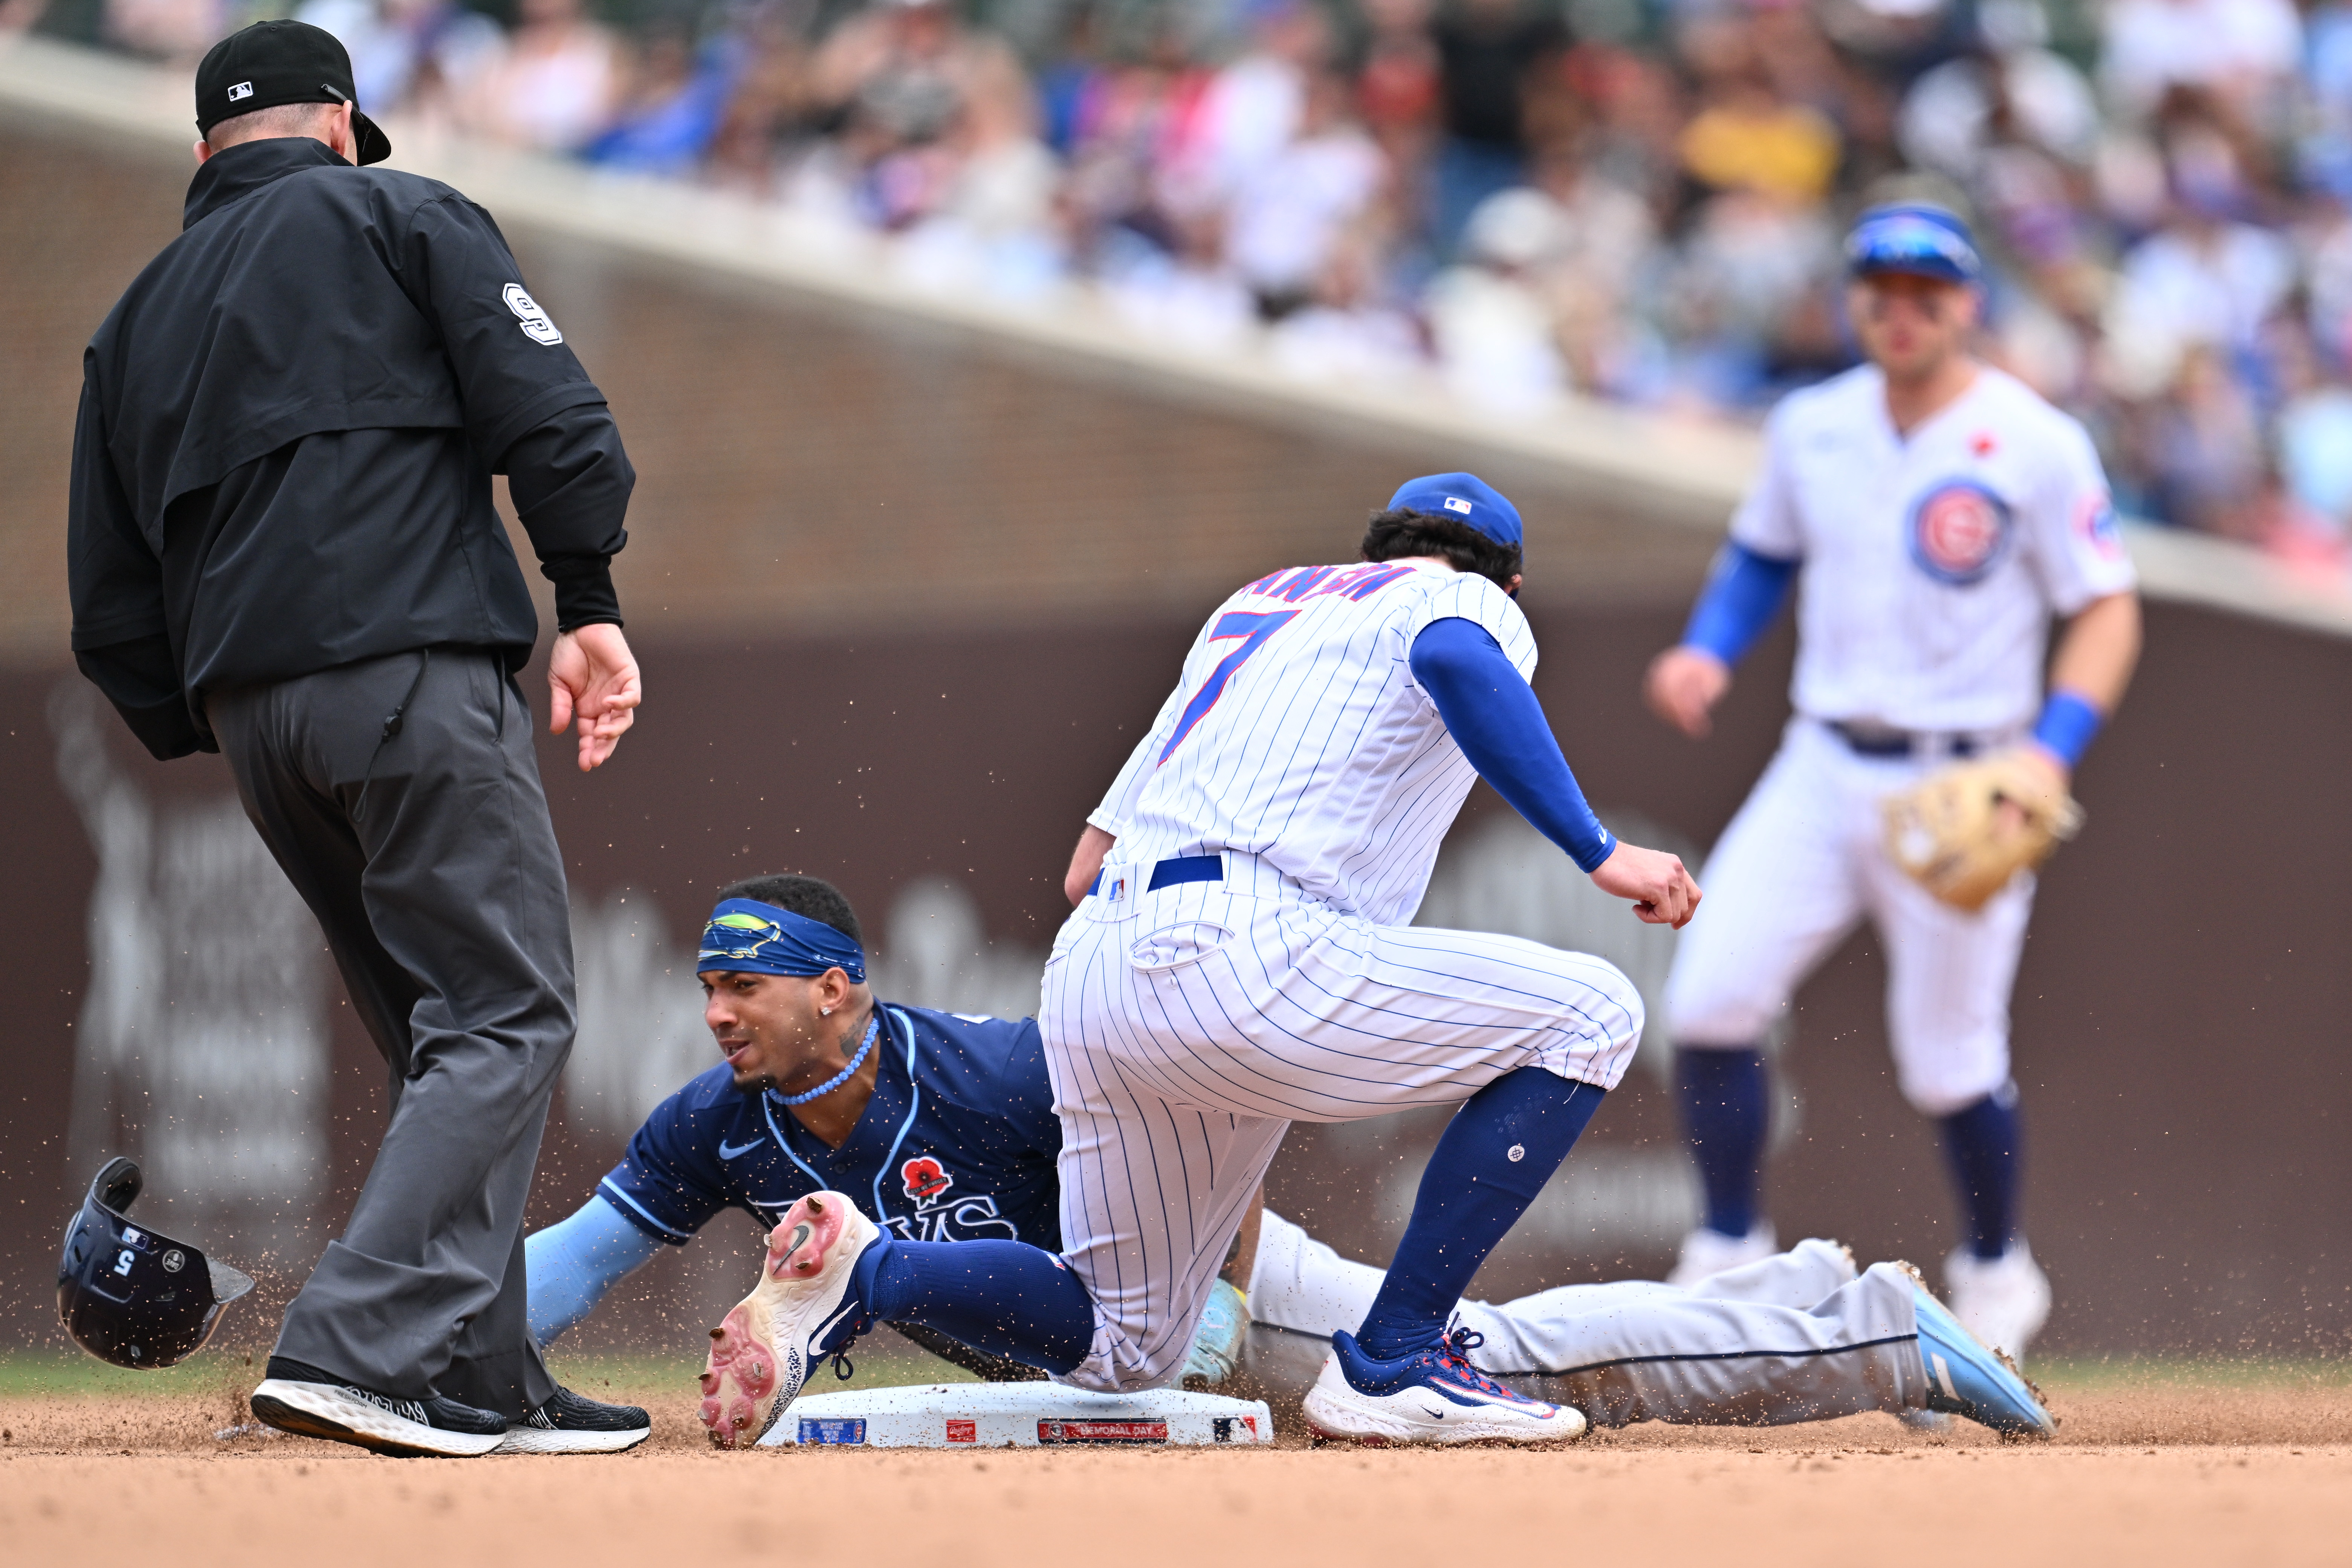 Wander Franco of the Tampa Bay Rays steals second base under the tag of Dansby Swanson #7 of the Chicago Cubs in the seventh inning at Wrigley Field on May 29, 2023 in Chicago, Illinois.